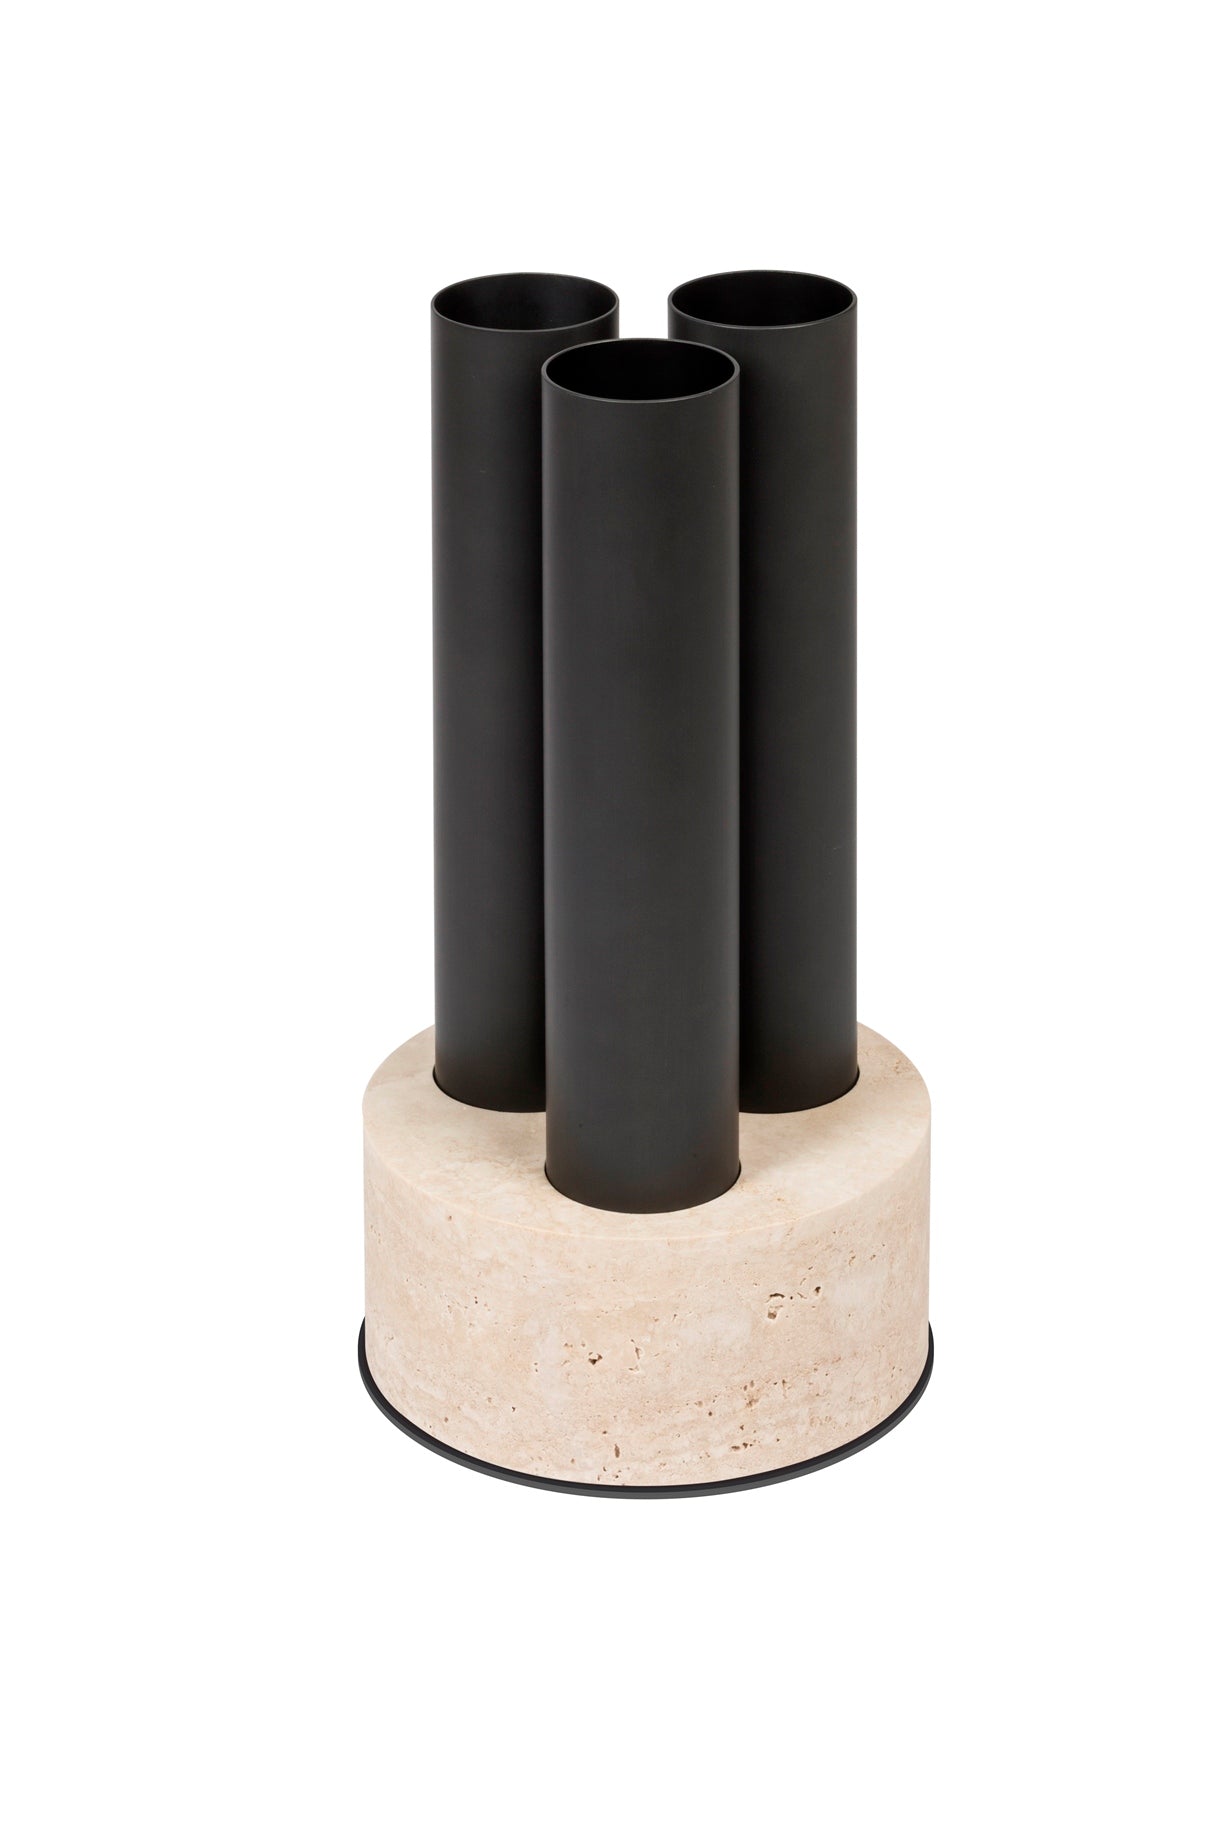 Giobagnara Ulisse Marble & Metal Umbrella Stand | Elegant Combination of Marble and Metal | Stylish Addition to Entryway Decor | Explore a Range of Luxury Home Accessories at 2Jour Concierge, #1 luxury high-end gift & lifestyle shop